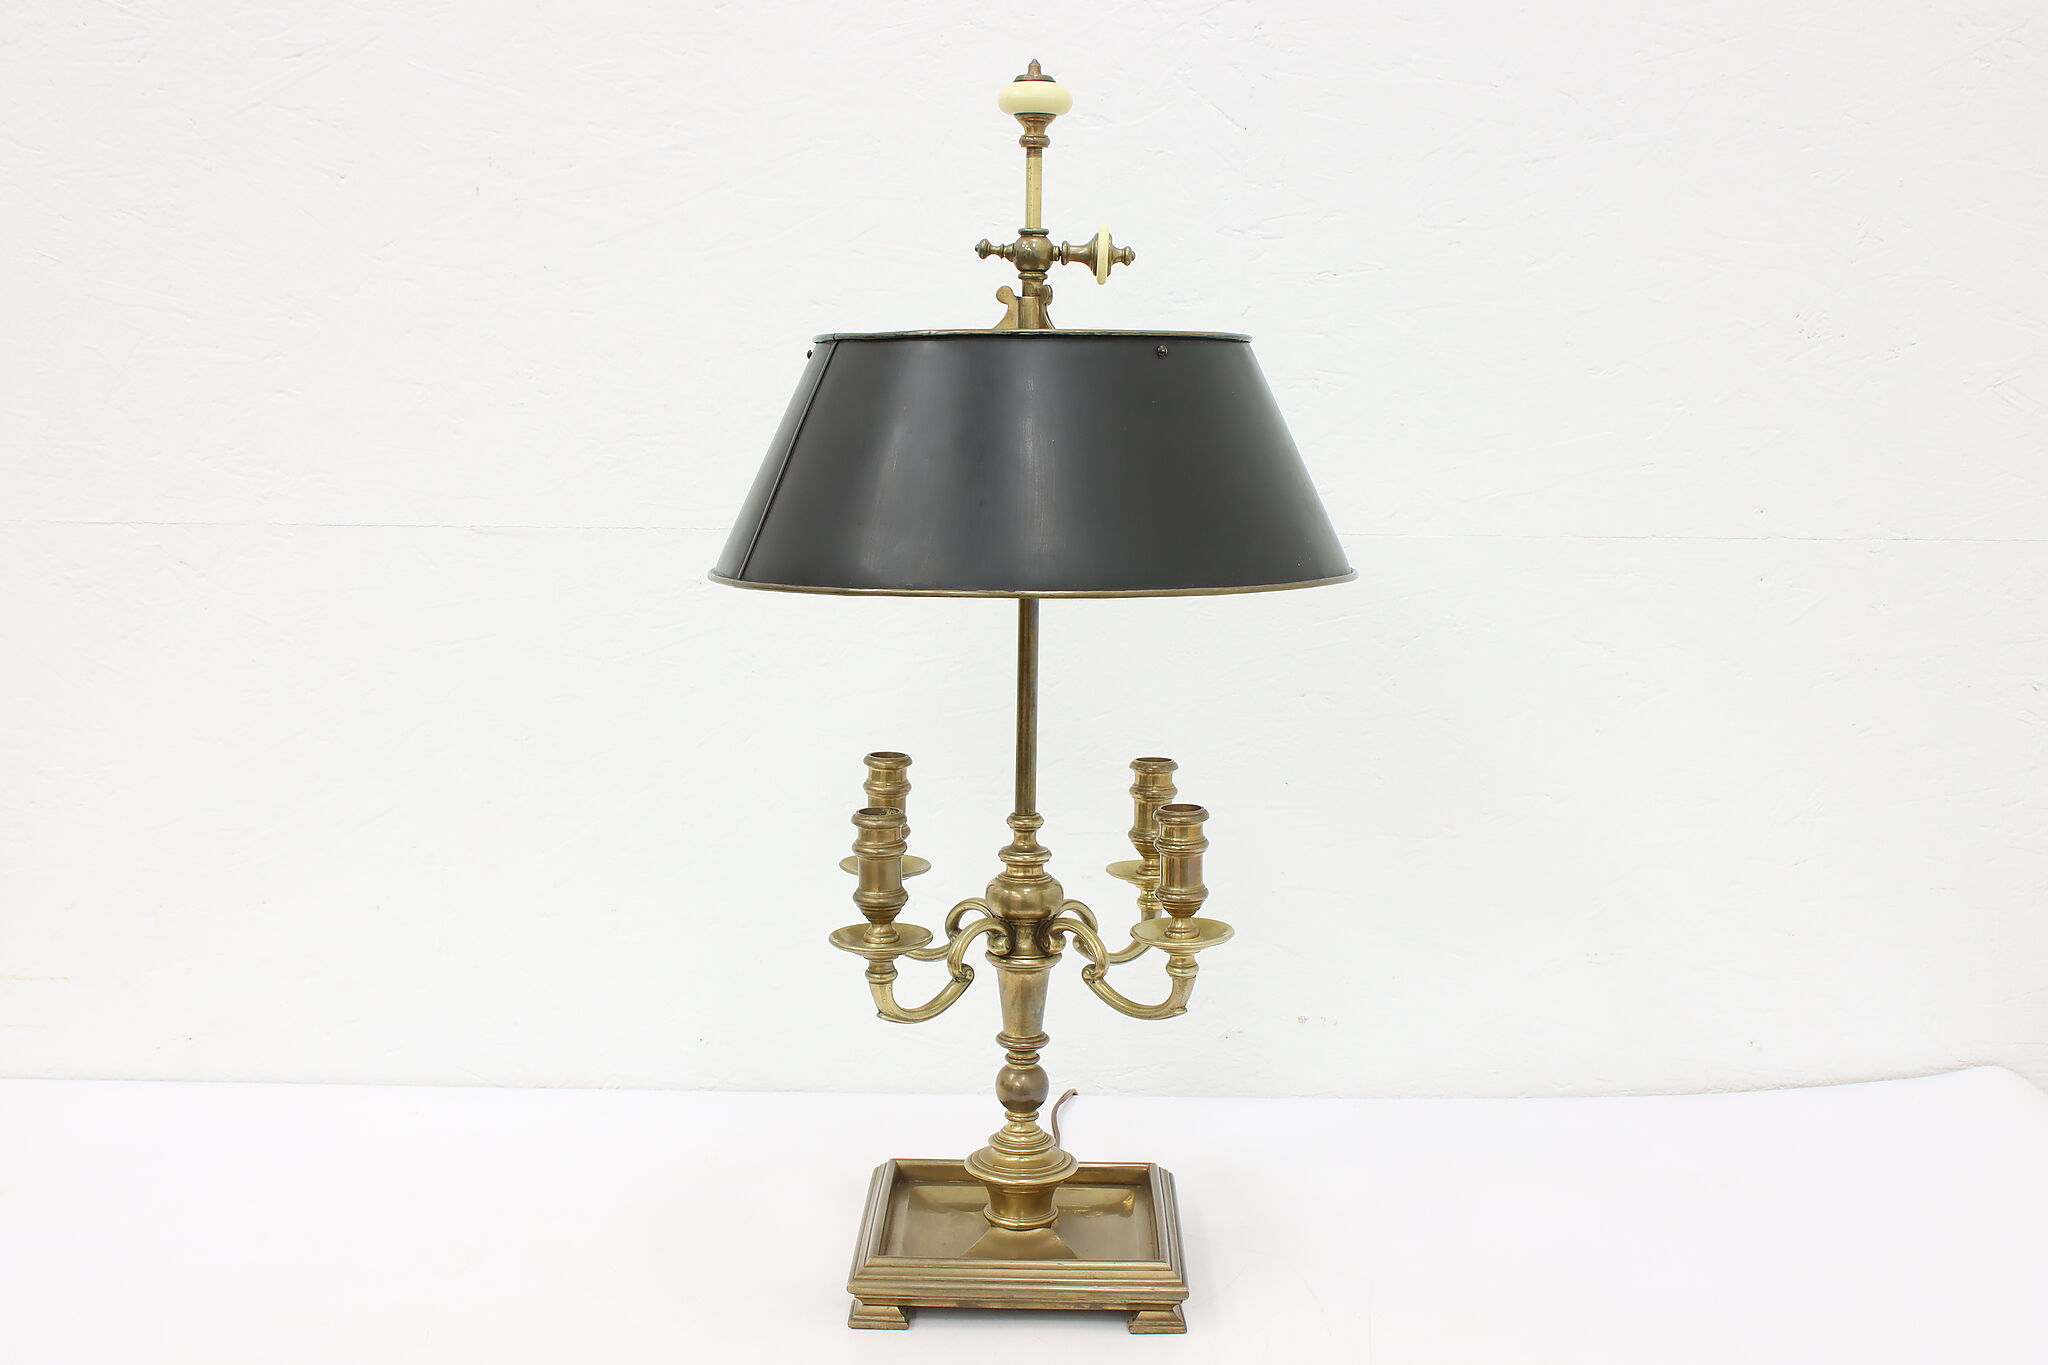 Traditional Bouillotte Vintage Solid Brass Lamp, Toleware Shade, Chapman